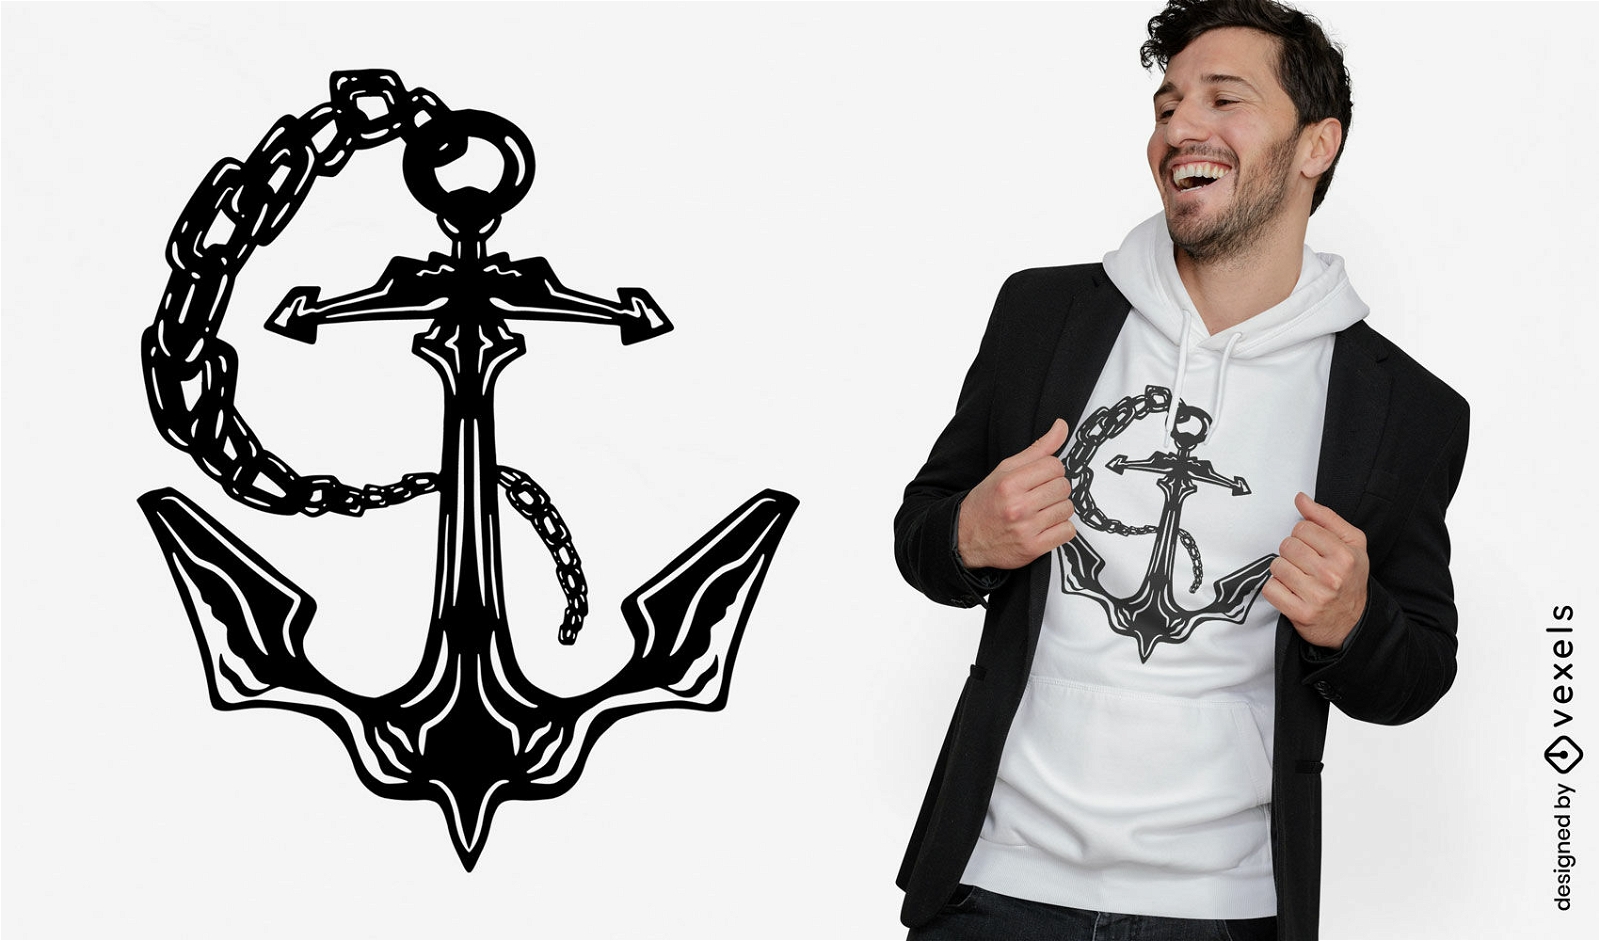 Ship anchor and chains t-shirt design